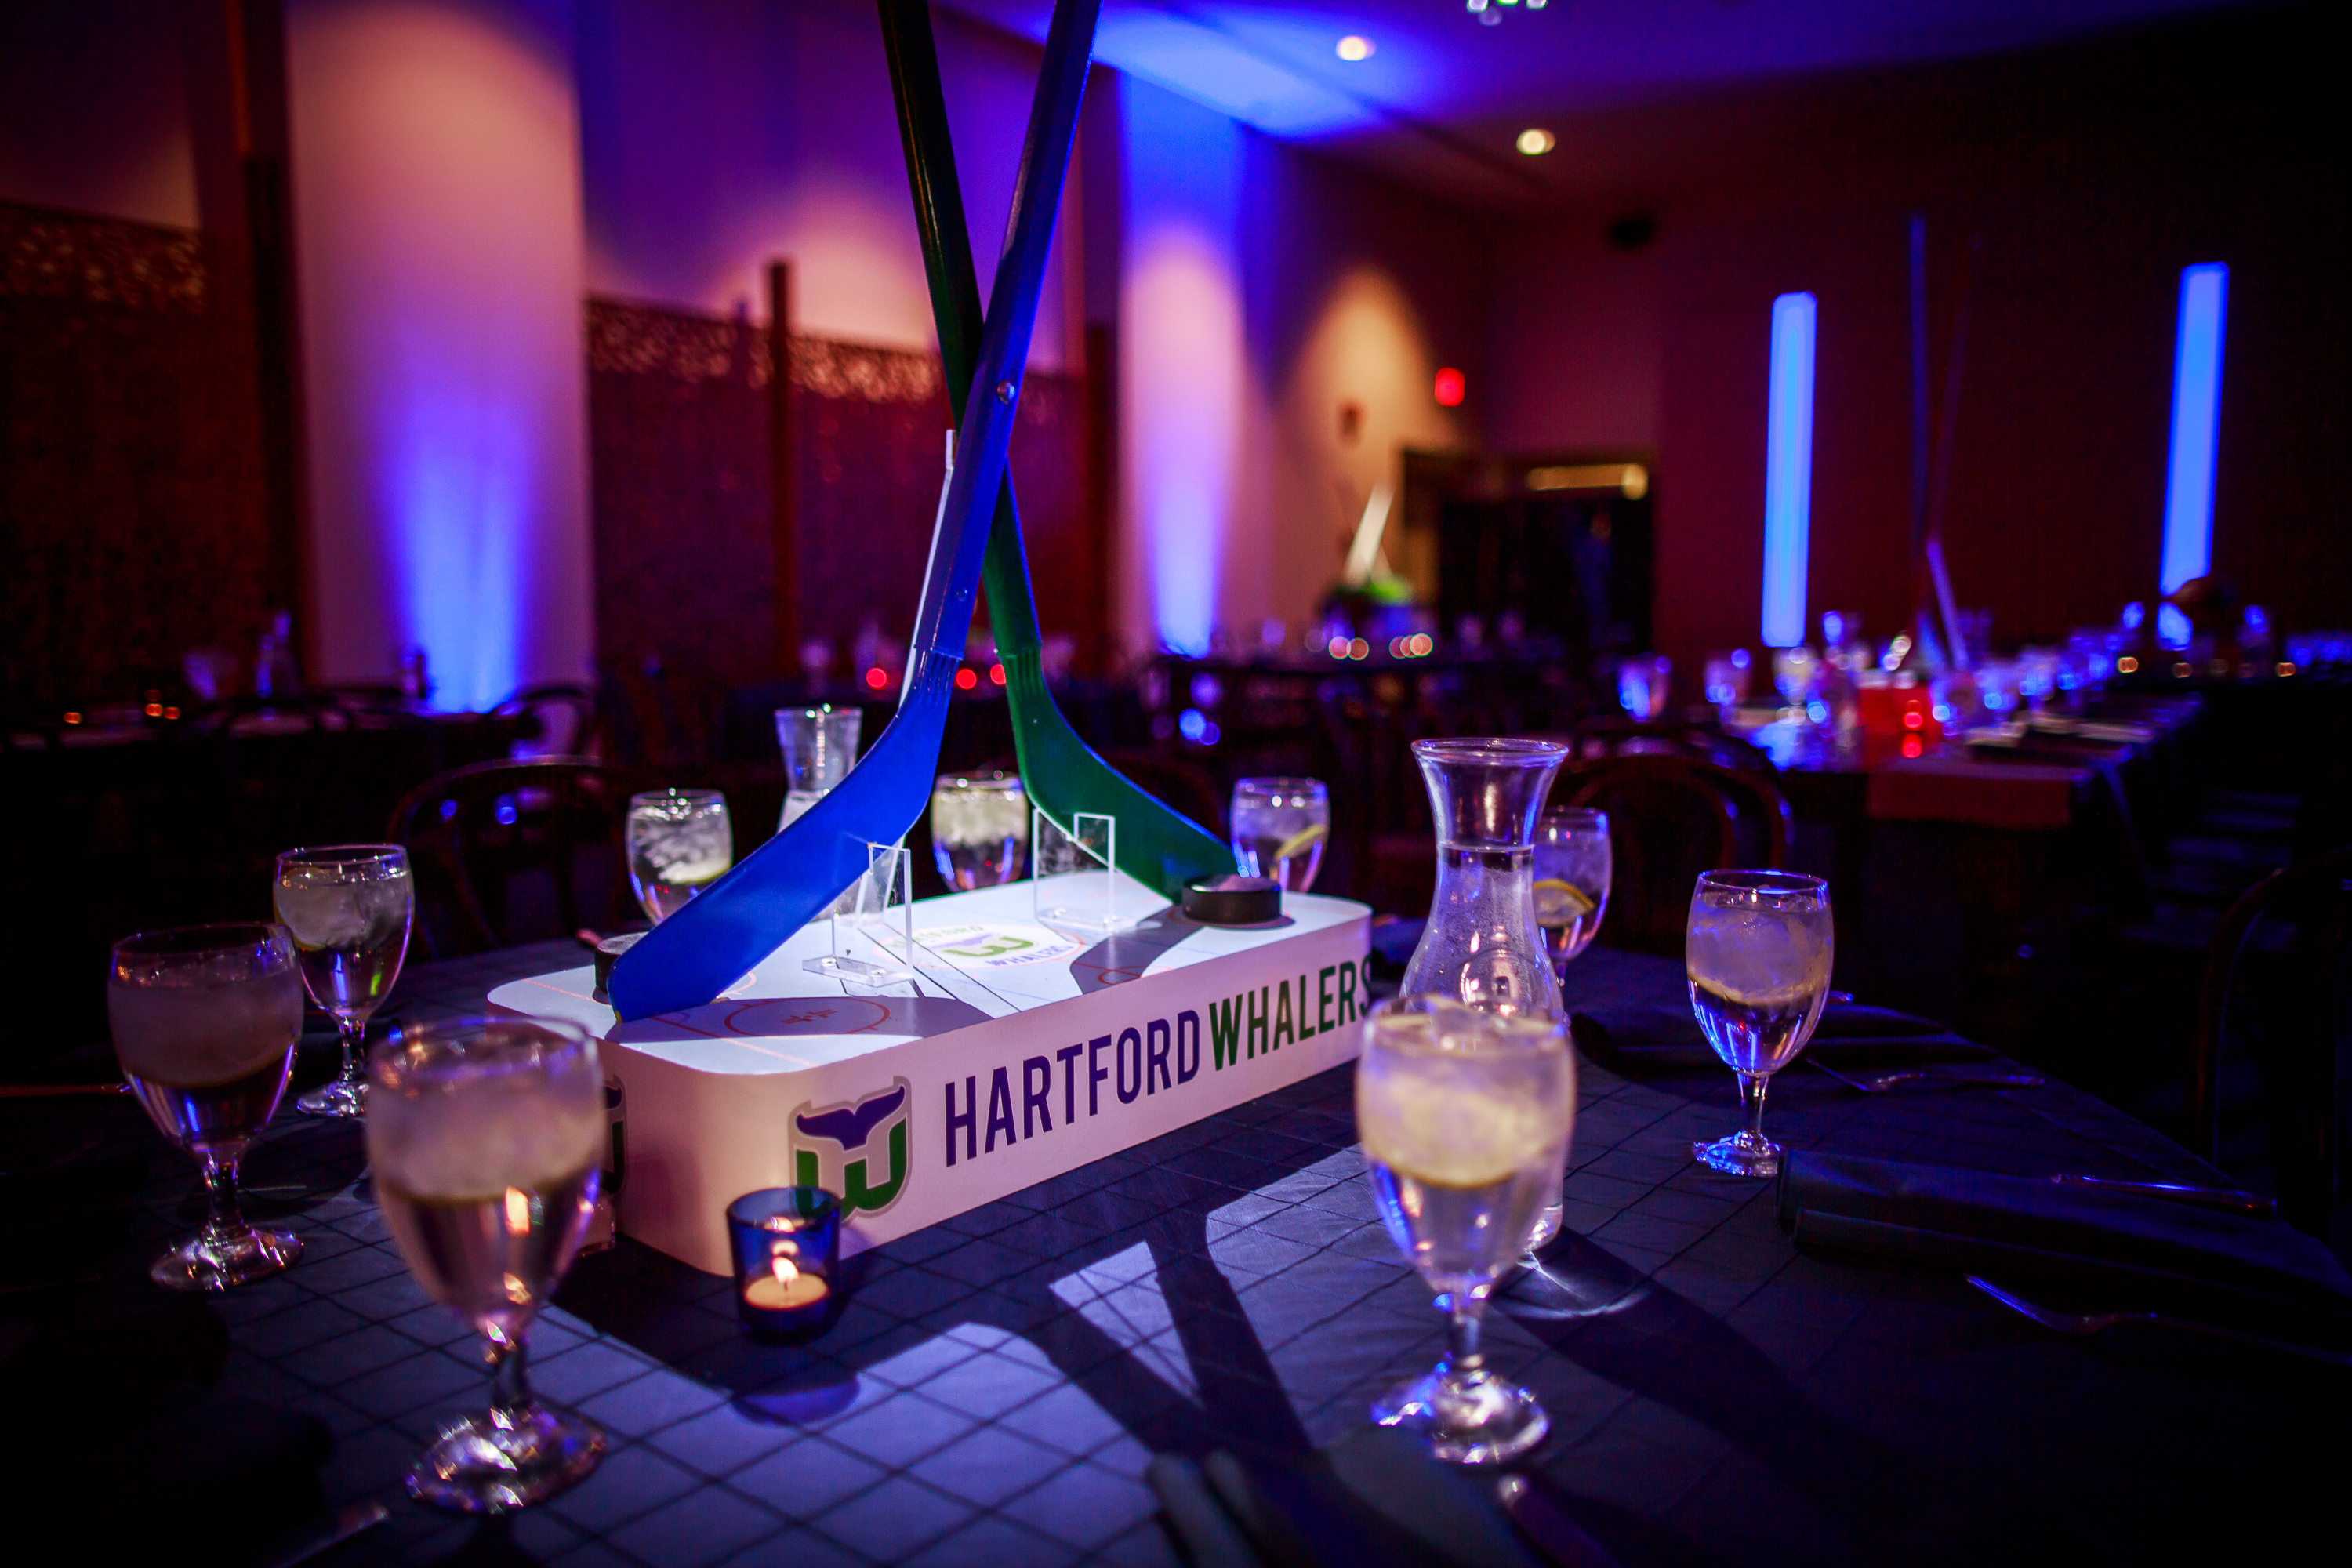 Hockey centerpiece at Vintage sports Bar Mitzvah party at Adas Israel in Washington DC | Pop Color Events | Adding a Pop of Color to Bar & Bat Mitzvahs in DC, MD & VA | Photo by Matt Mendelsohn Creative